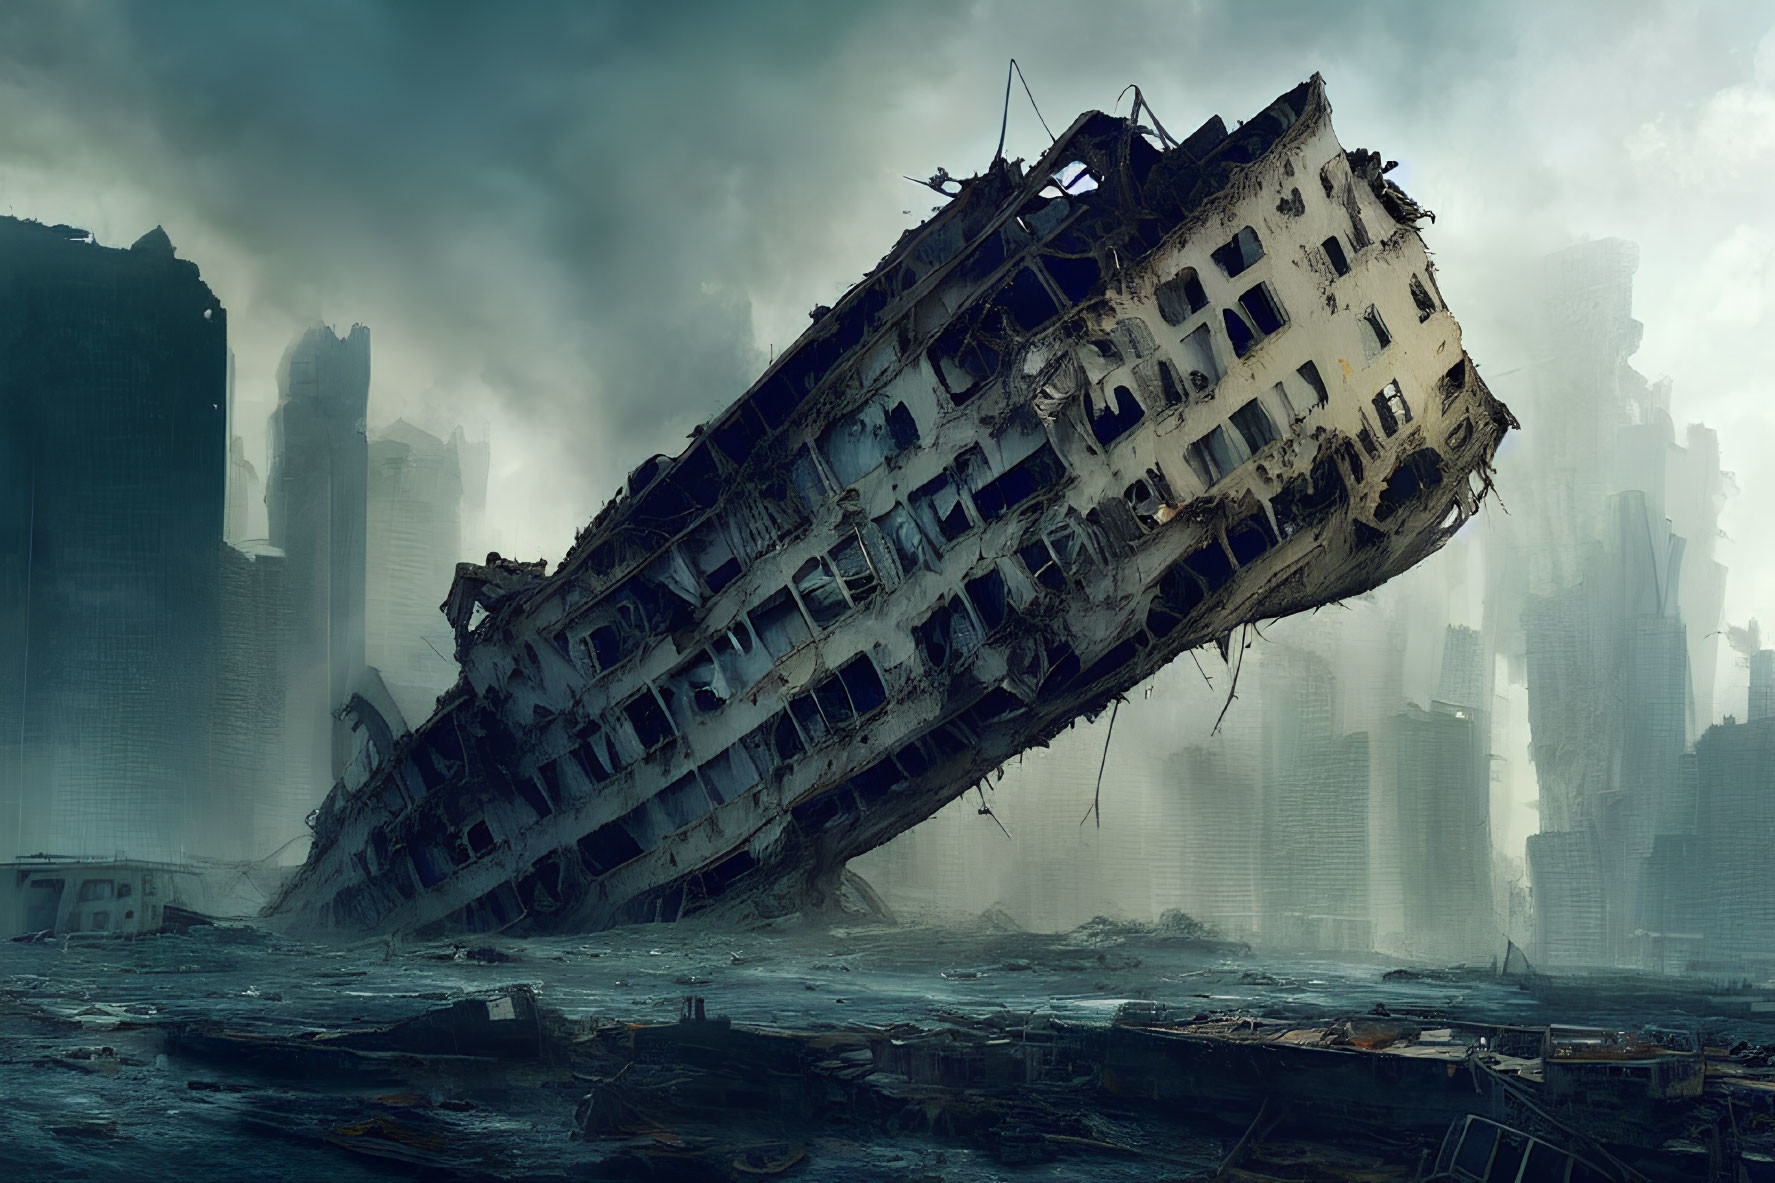 Decaying capsized cruise ship in waterlogged cityscape storm.